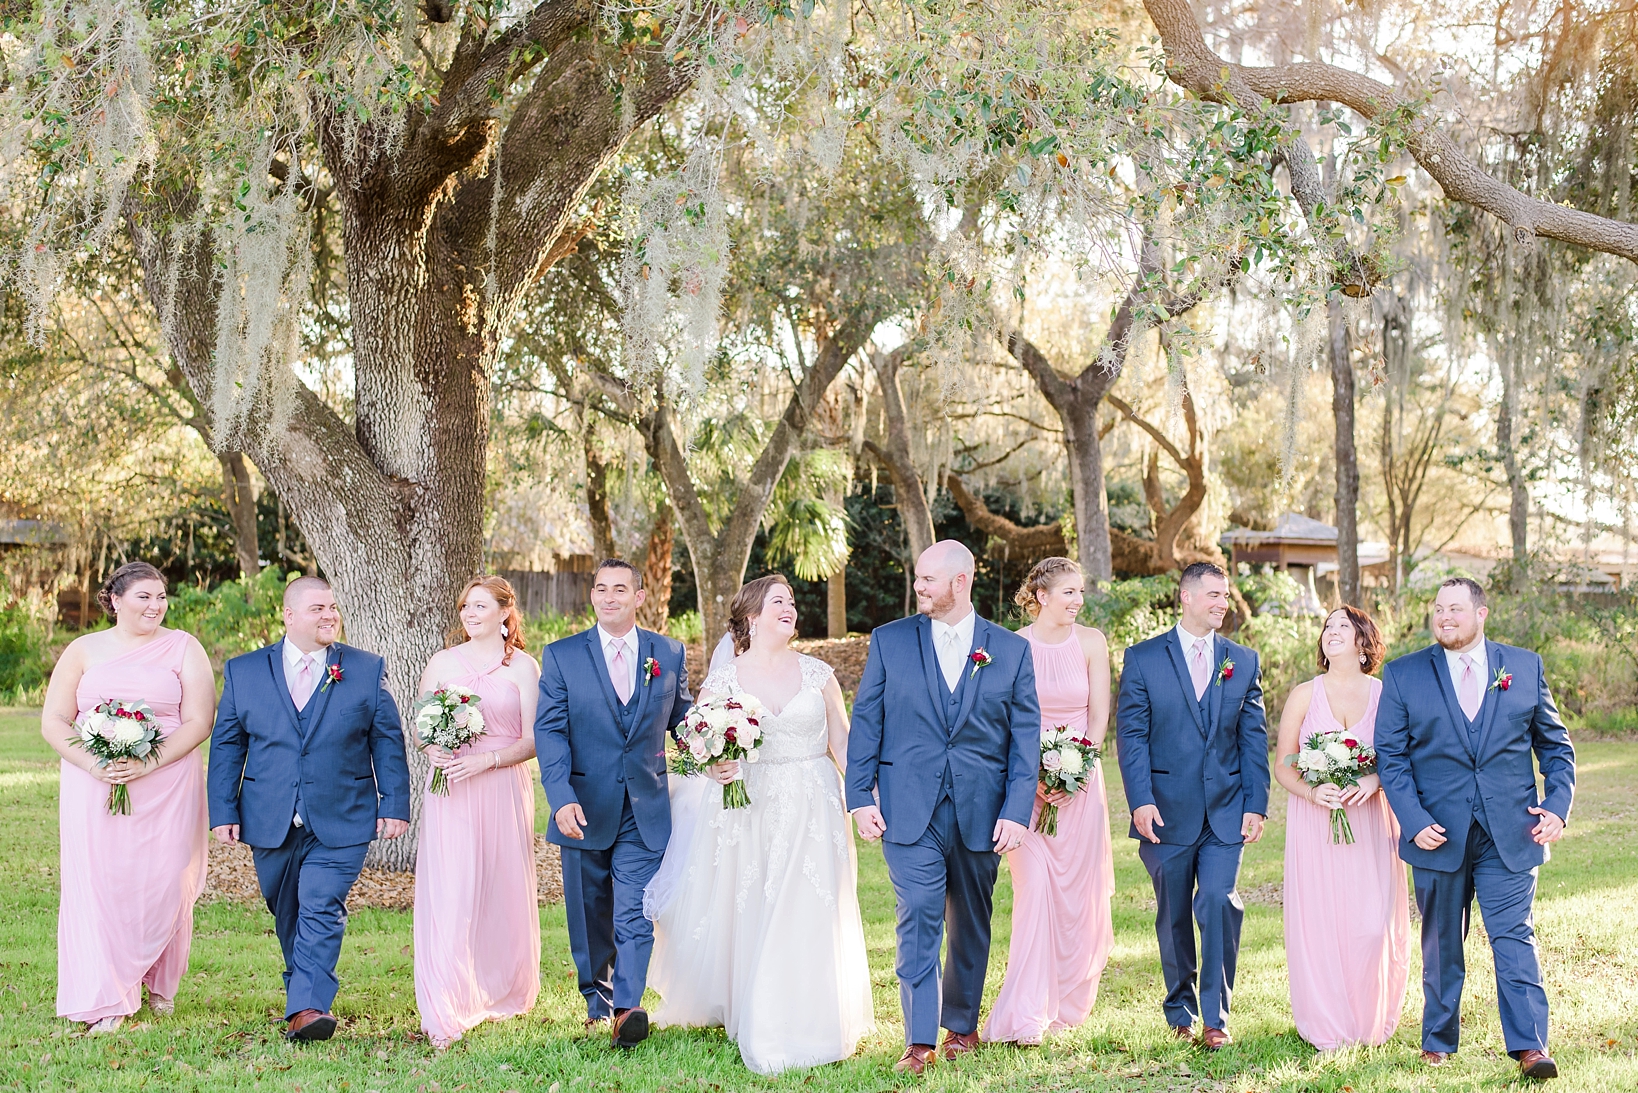 The bridal party in navy and blush in rustic, FL